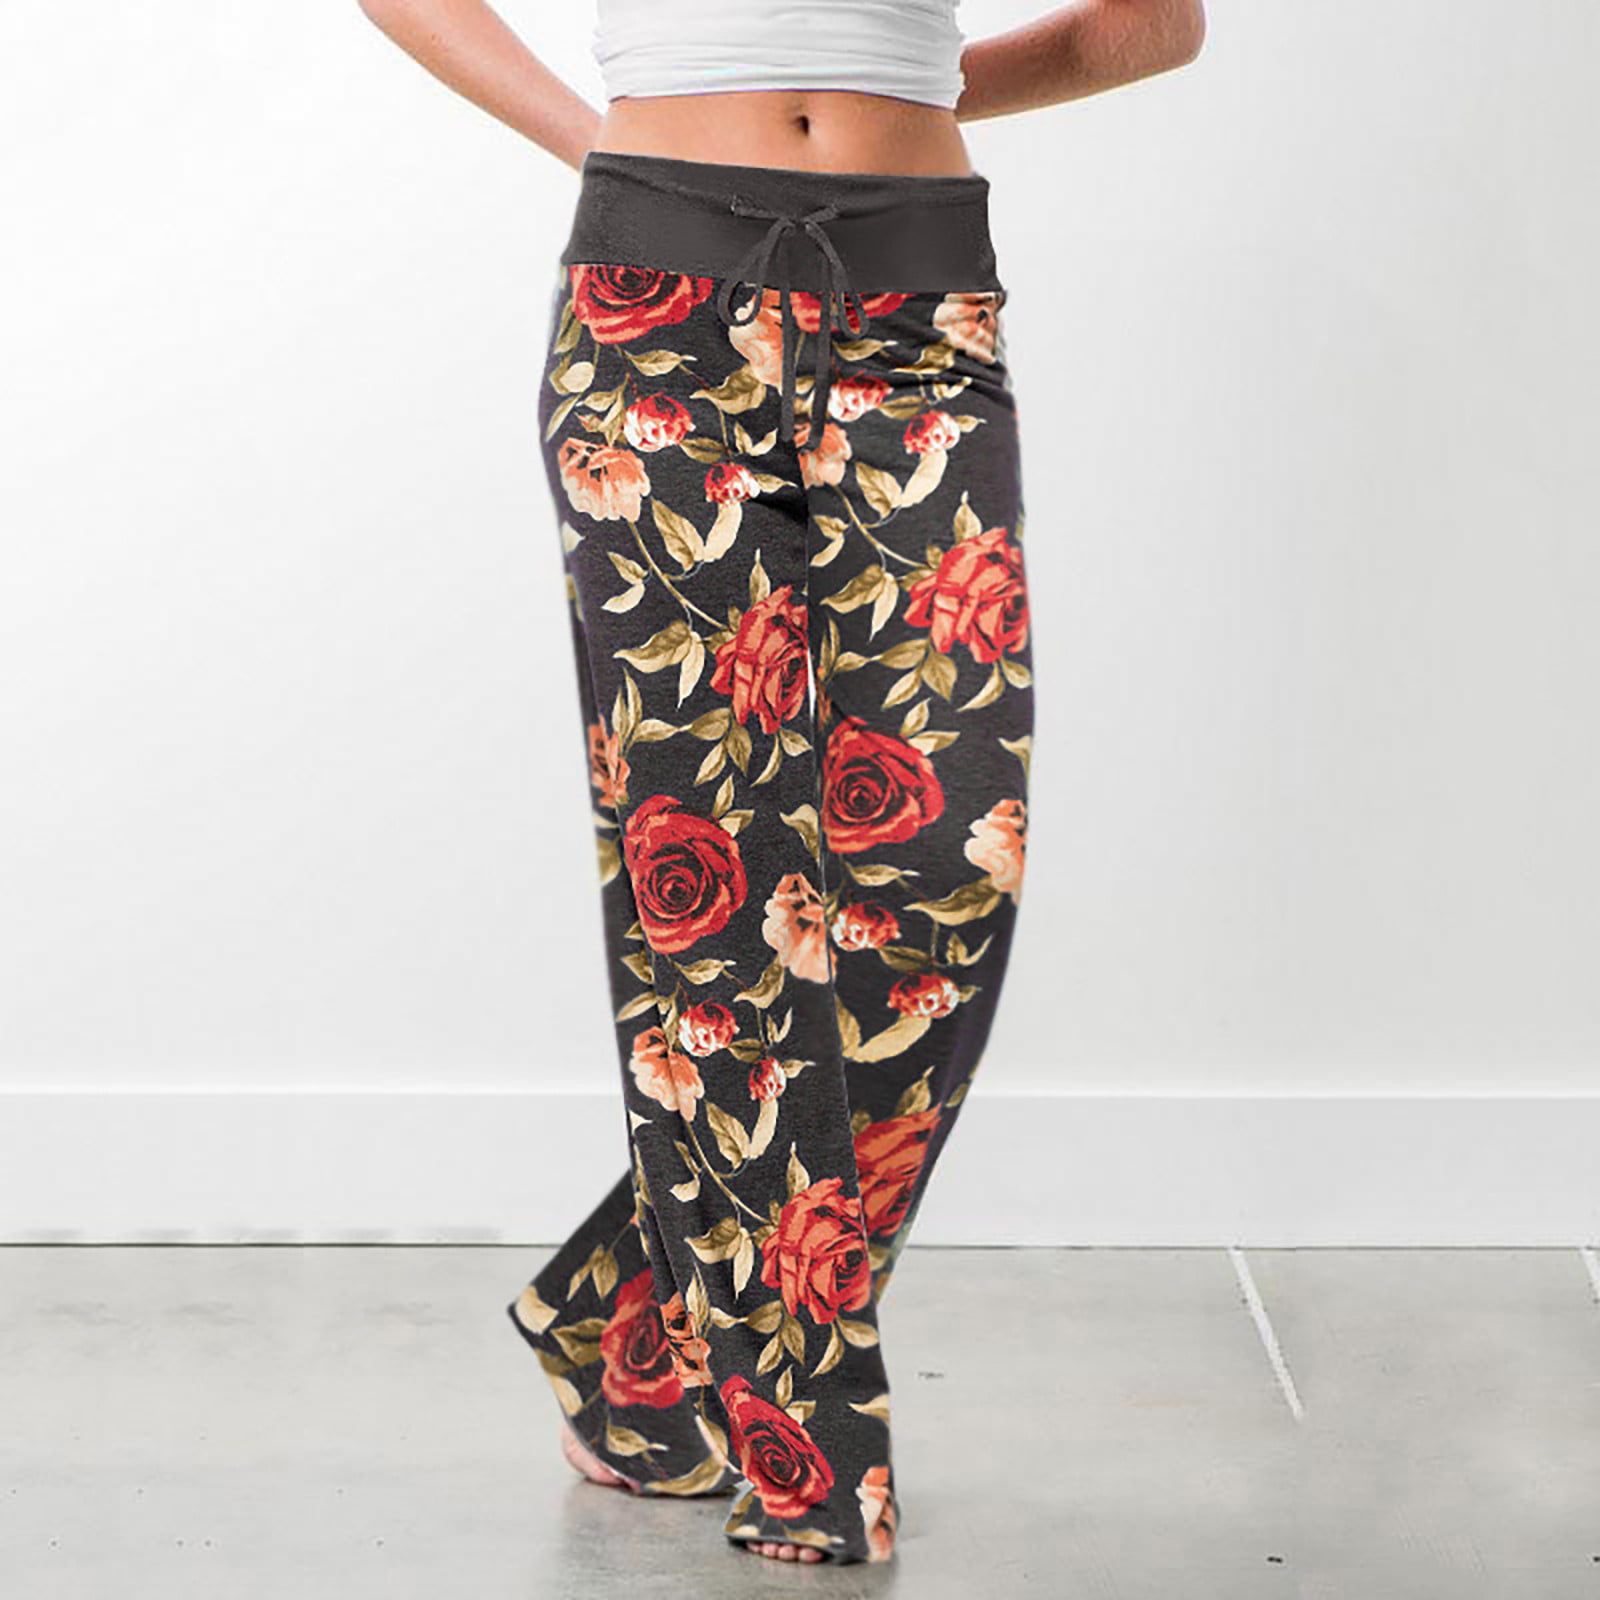 WOMENS LADIES PLAZZO TROUSERS FLORAL PRINT SUMMER CASUAL ELASTICATED LOUNGE PANT 